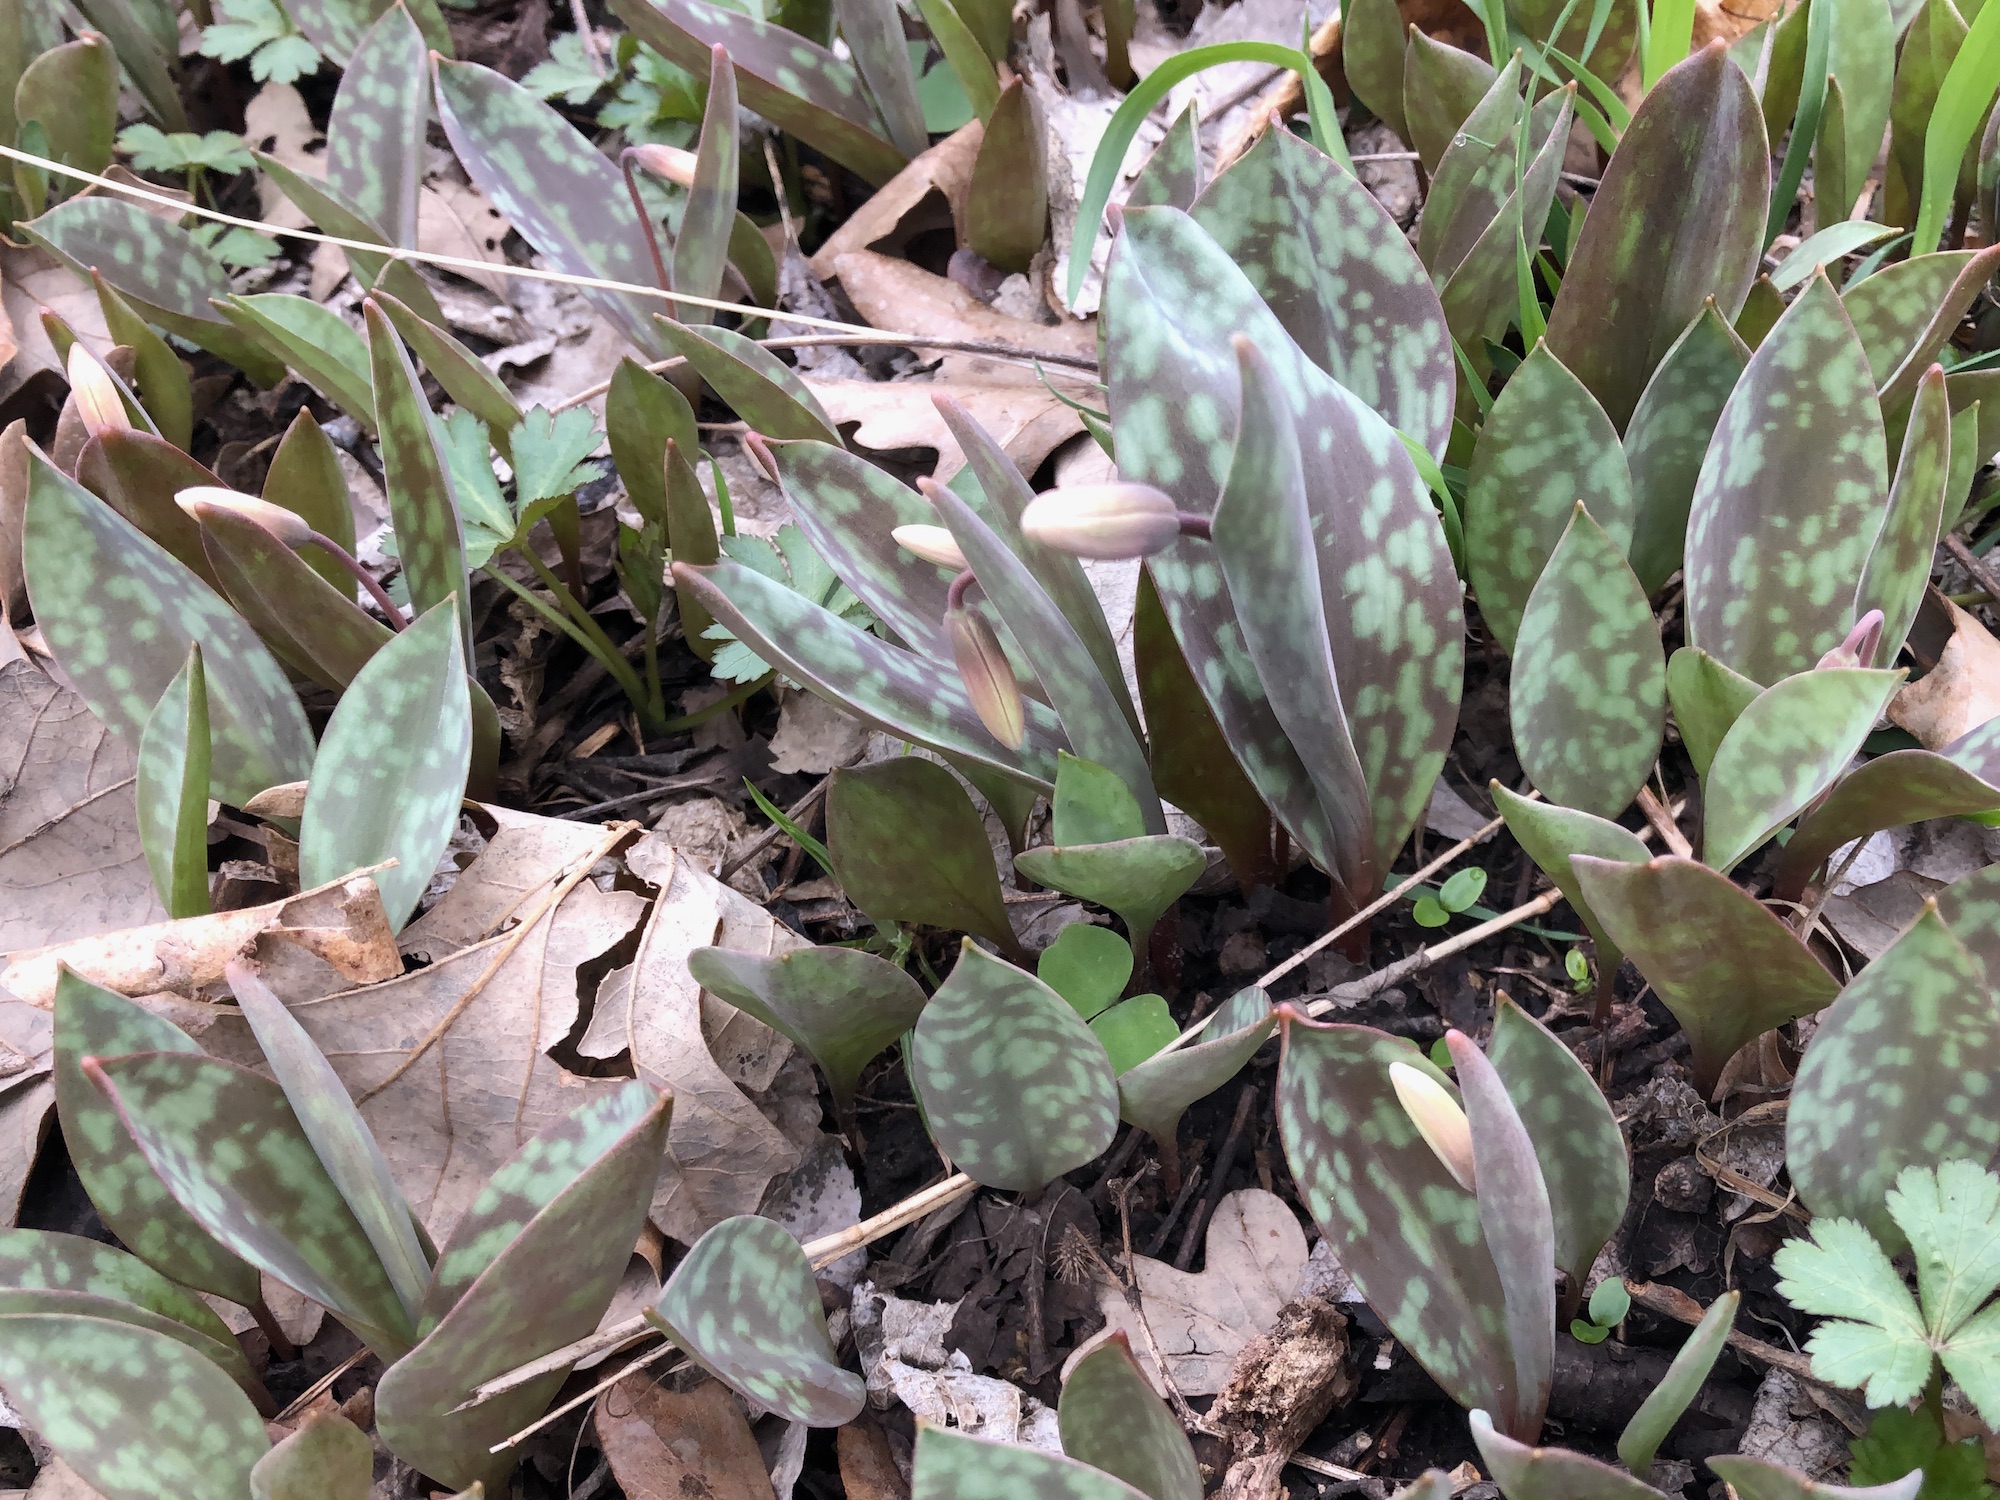 White Trout Lilies on April 18, 2019 near Council Ring.